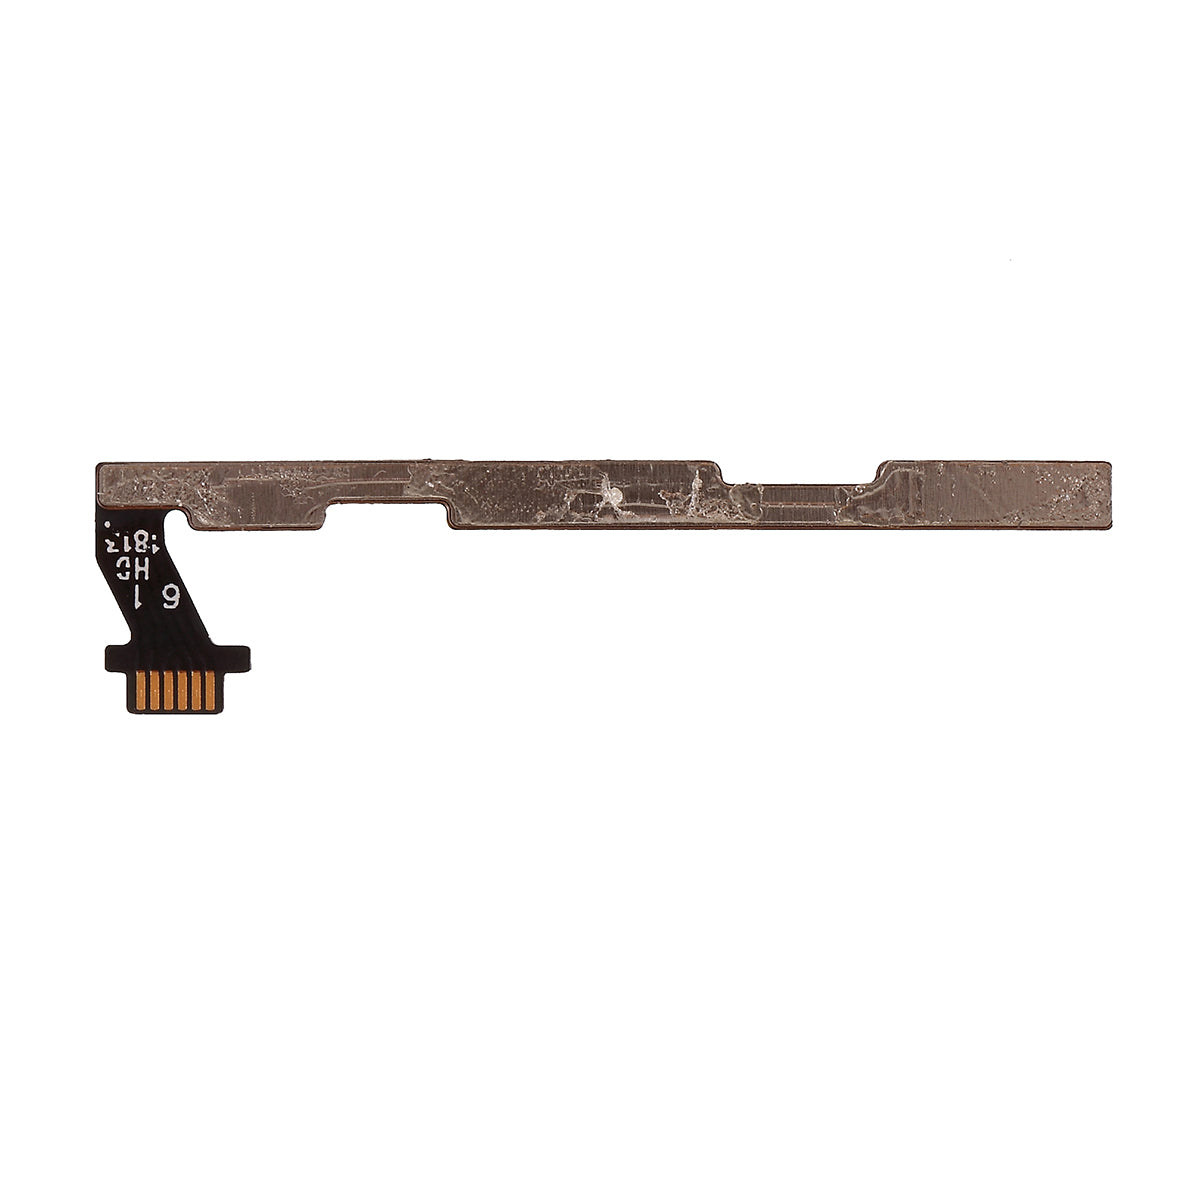 OEM Volume Button Flex Cable Replacement Part for Huawei Y6 (2017)